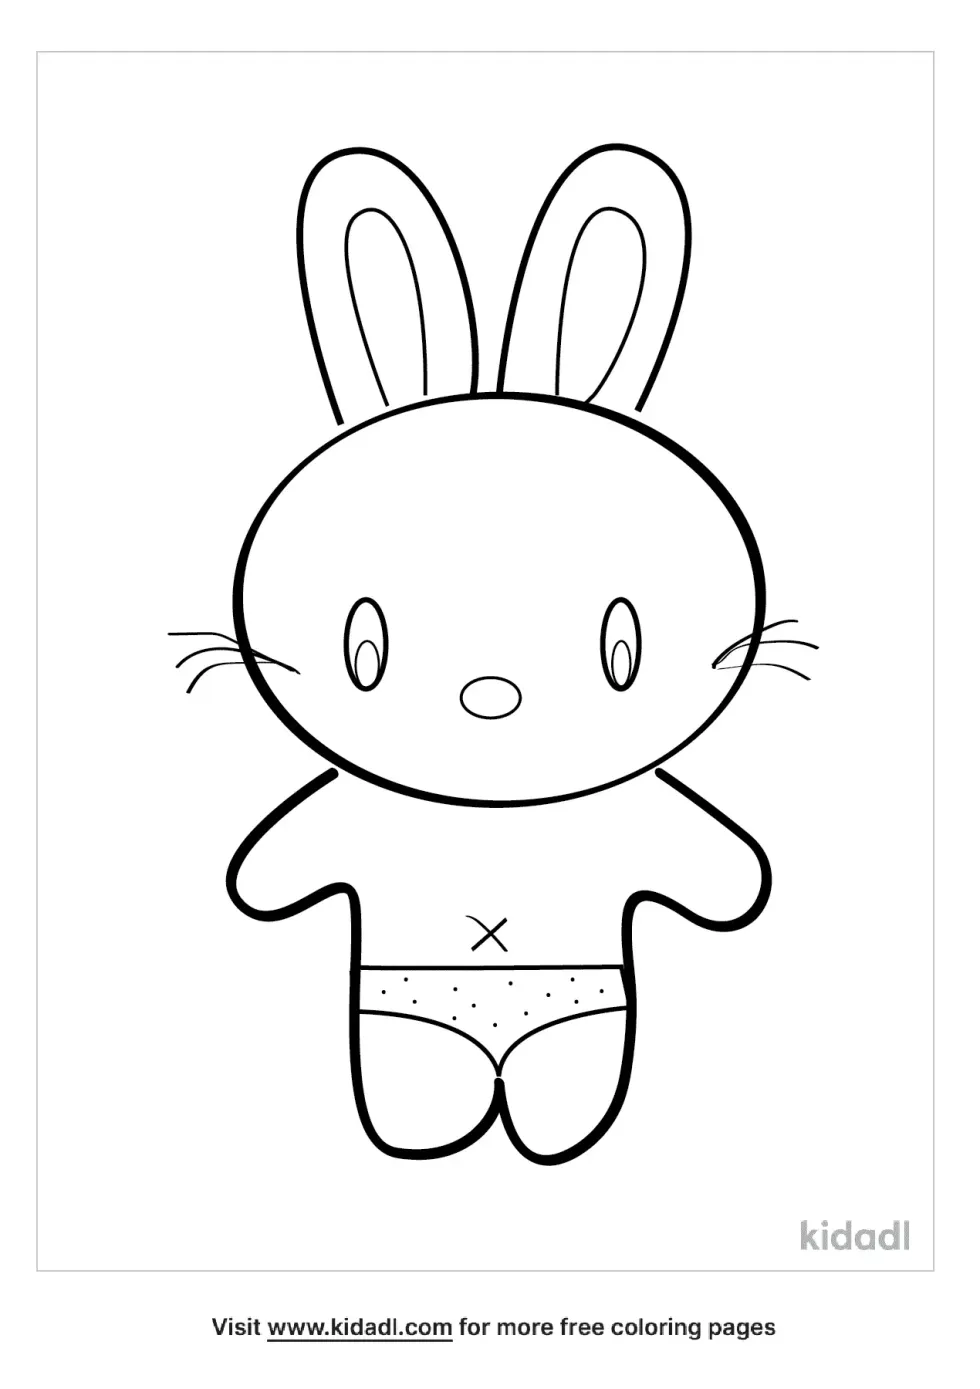 Bunny Paper Dolls Coloring Page